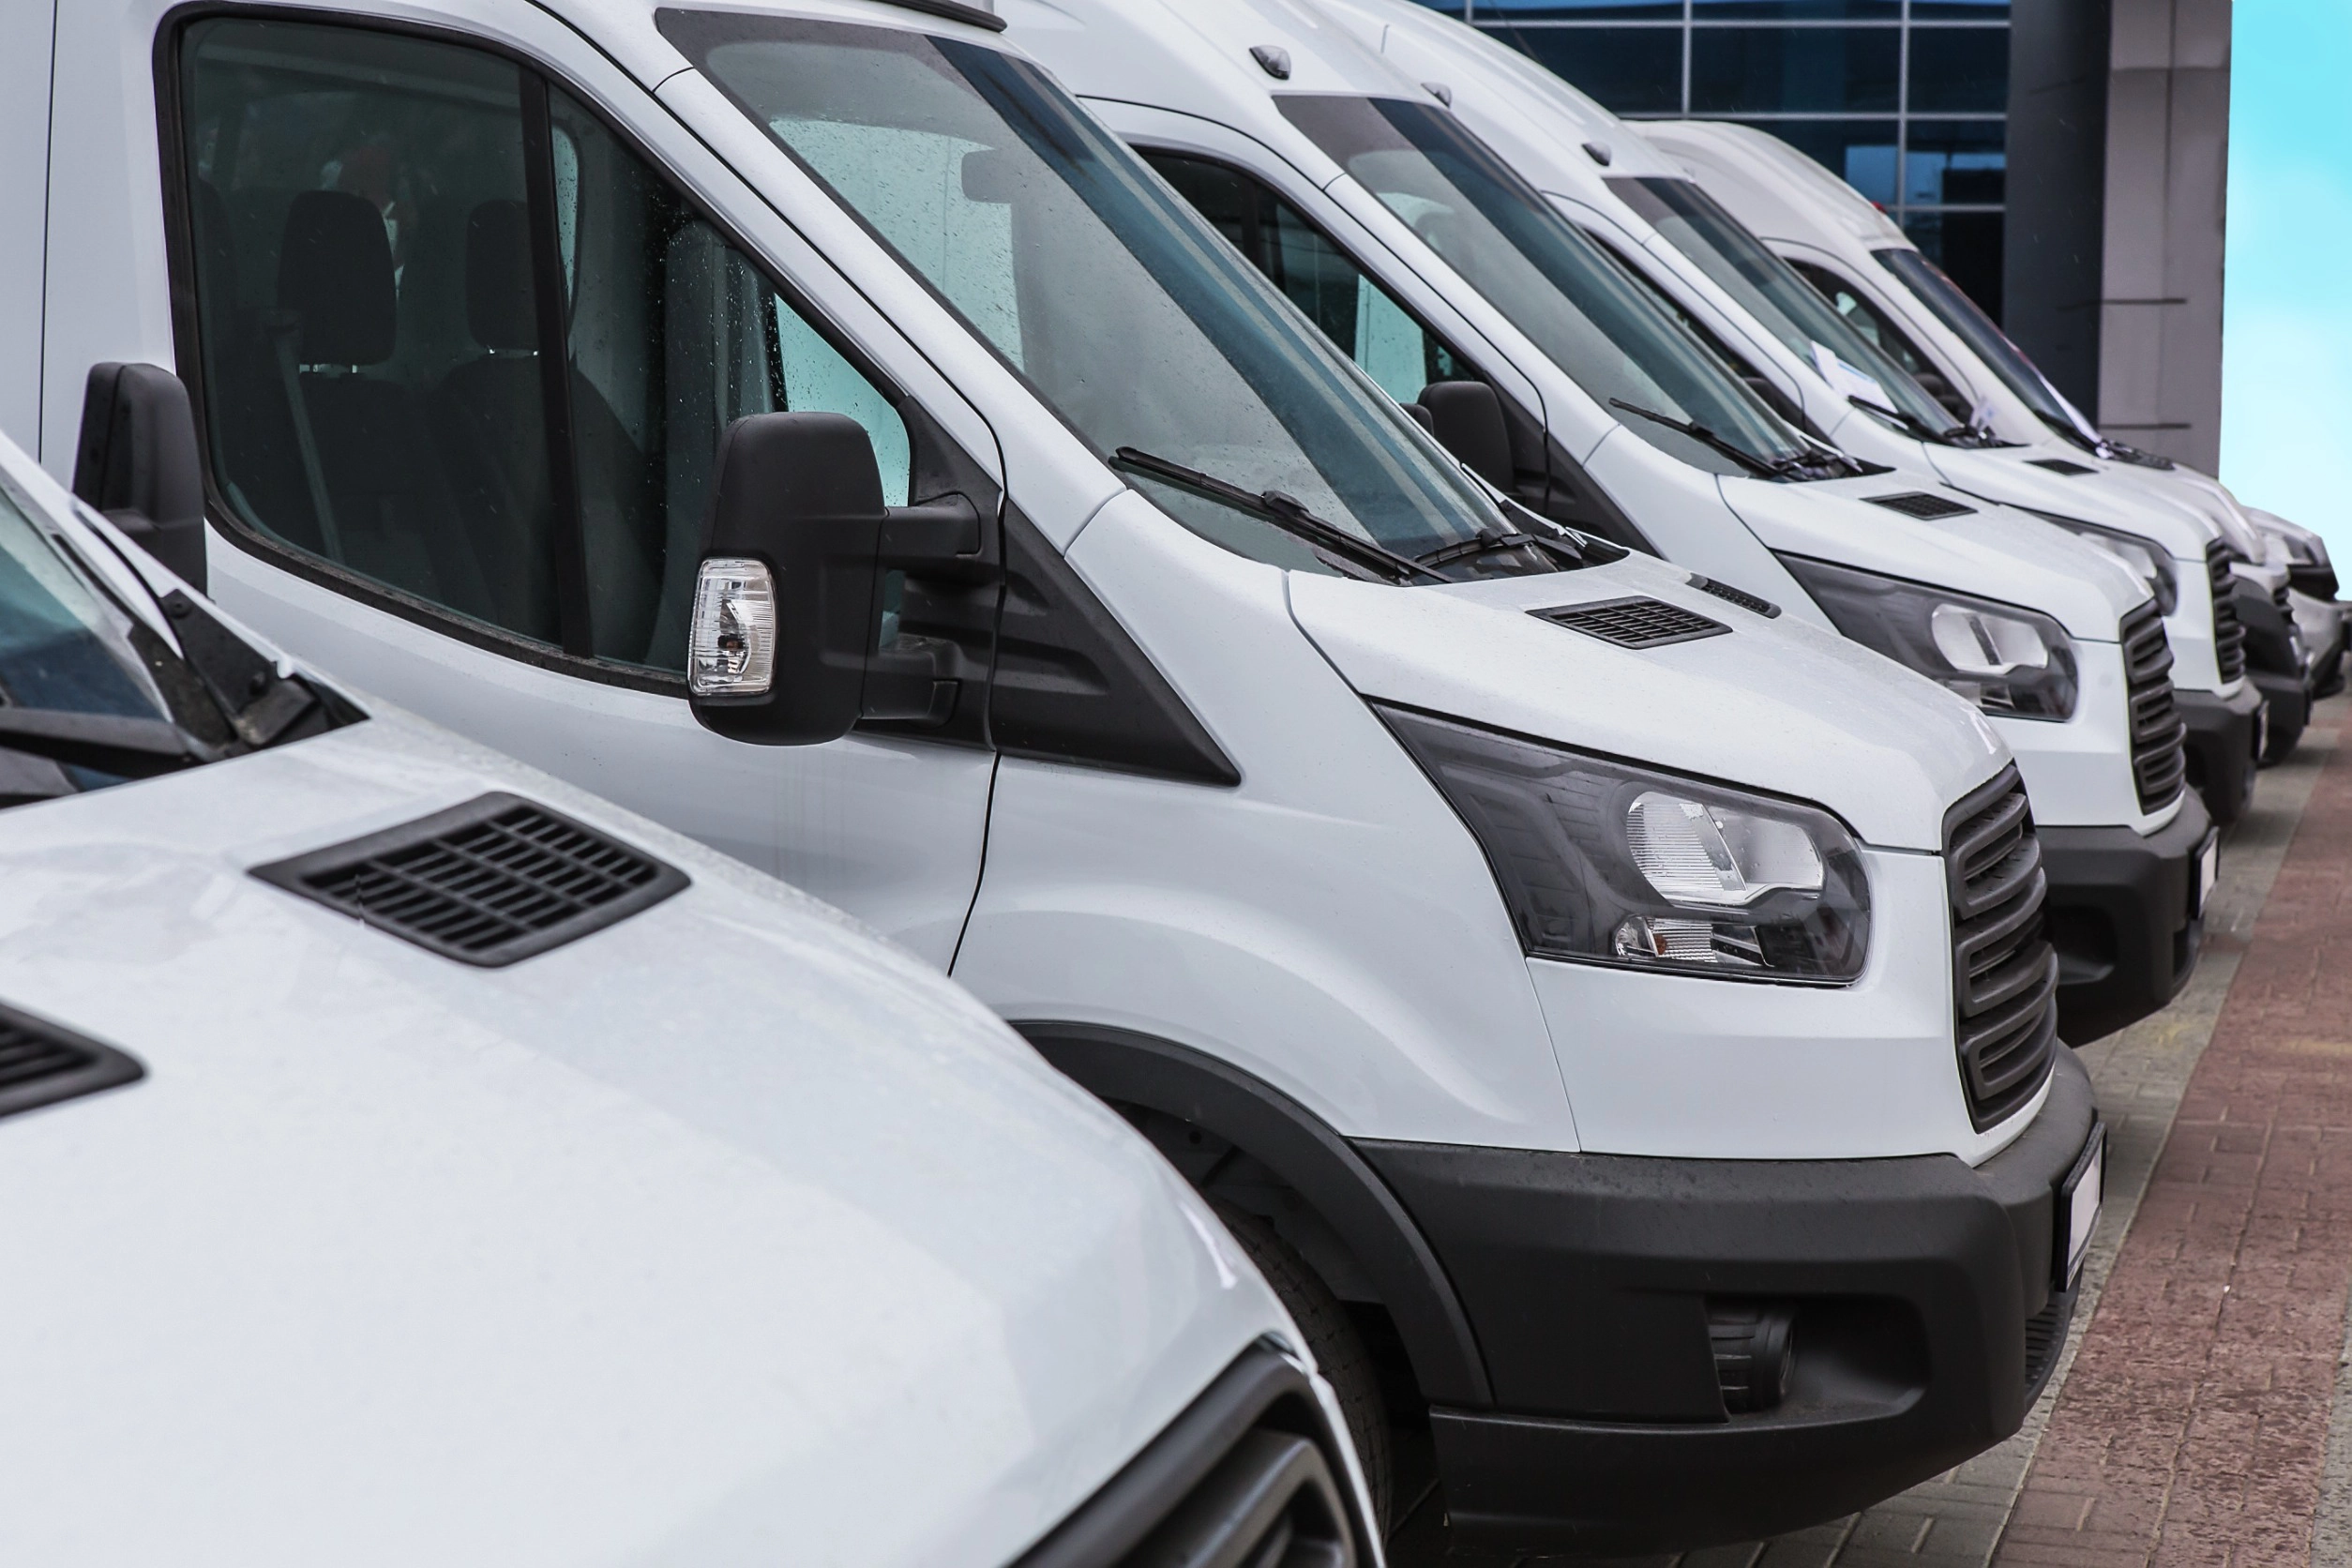 Fleet Services. White Sprinter Vans Lined Up In A Row.